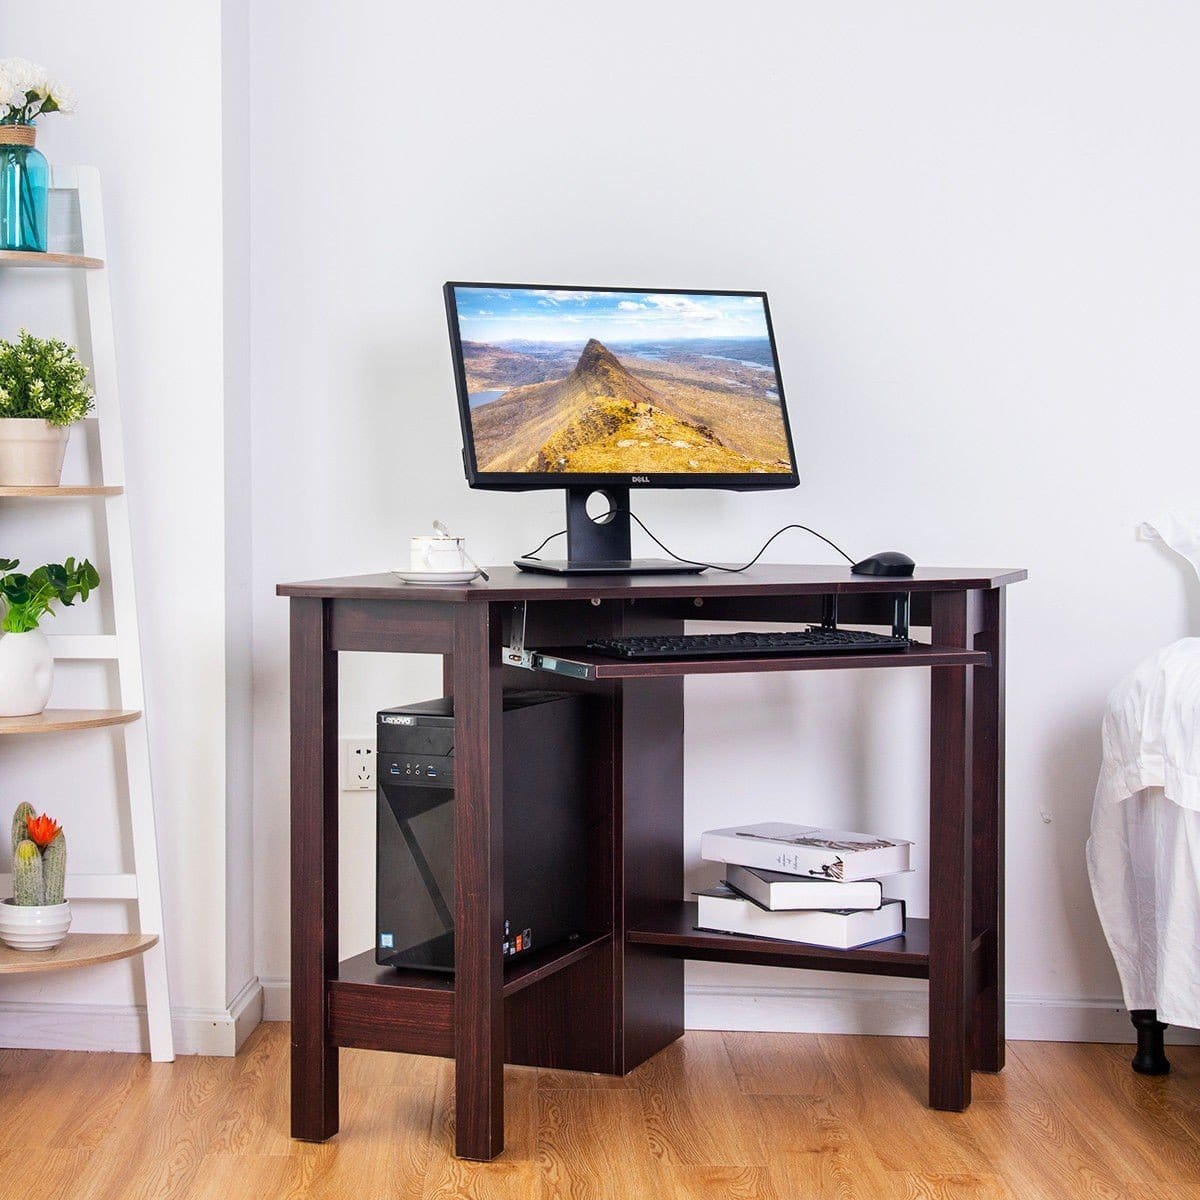 Wooden Corner Desk With Drawer by Plugsus Home Furniture